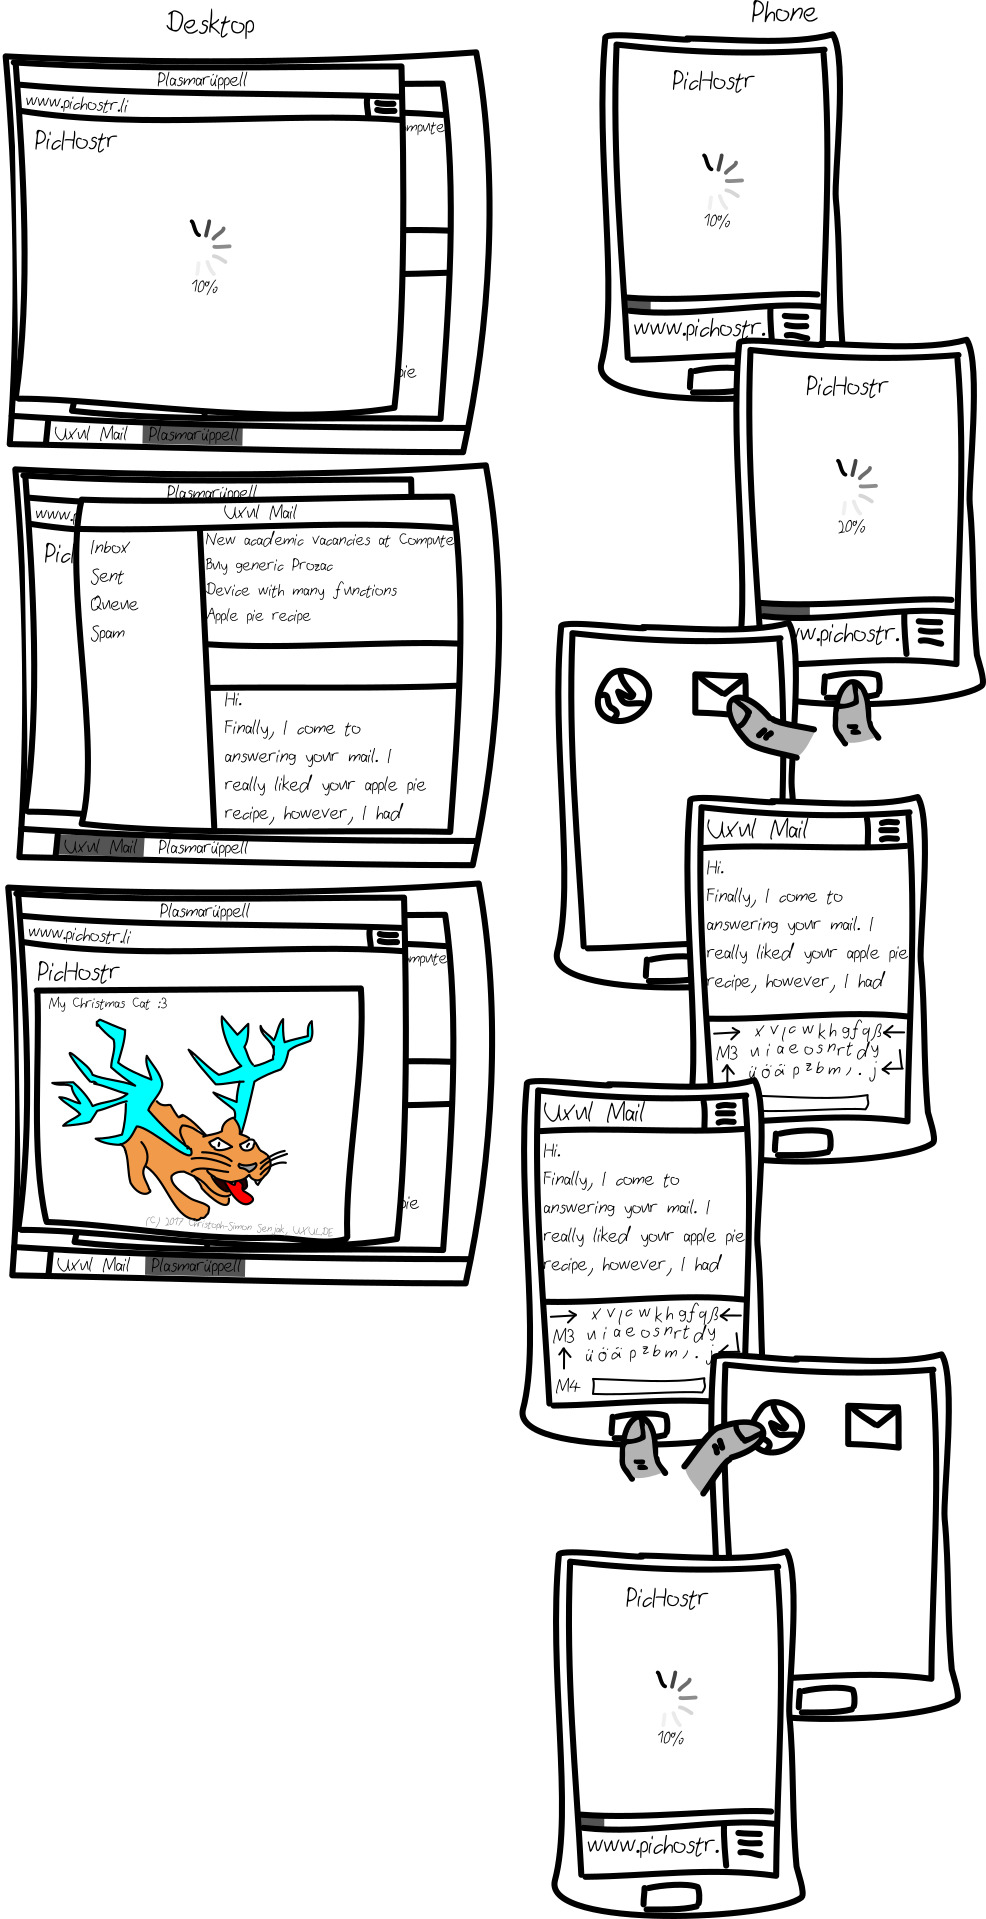 The comic consists of two columns, the left column has the title "Desktop", the right column has the title "Phone". The left column shows a usual desktop with a taskbar. Two programs "Uxul Mail" and "Plasmarüppel" are opened, the latter one is in the foreground and loads a web page named "PicHostr" at 10%. The user switches to "Uxul Mail" which then comes to the foreground. It is a mail program, showing an inbox with some spammails, as well as a mail that the user currently writes, with the content "Hi. Finally, I come to answering your mail. I really liked your apple pie recipe, however, I had…". Then, the user switches back to the browser Plasmarüppel, and it shows the page PicHostr with a photo of a cat wearing a deer antler, titled "My Christmas Cat :3" The right column shows a smartphone with a browser which currently loads the page PicHostr at 10%, 20% in the second panel, where the user presses the Home button. In the third panel, the home screen is shown, and the user switches to an app called Uxul Mail, and writes a mail with the same content as the mail from the left column. He then presses the Home button again and turns back to the browser, which again loads PicHostr, but is back at 10%.